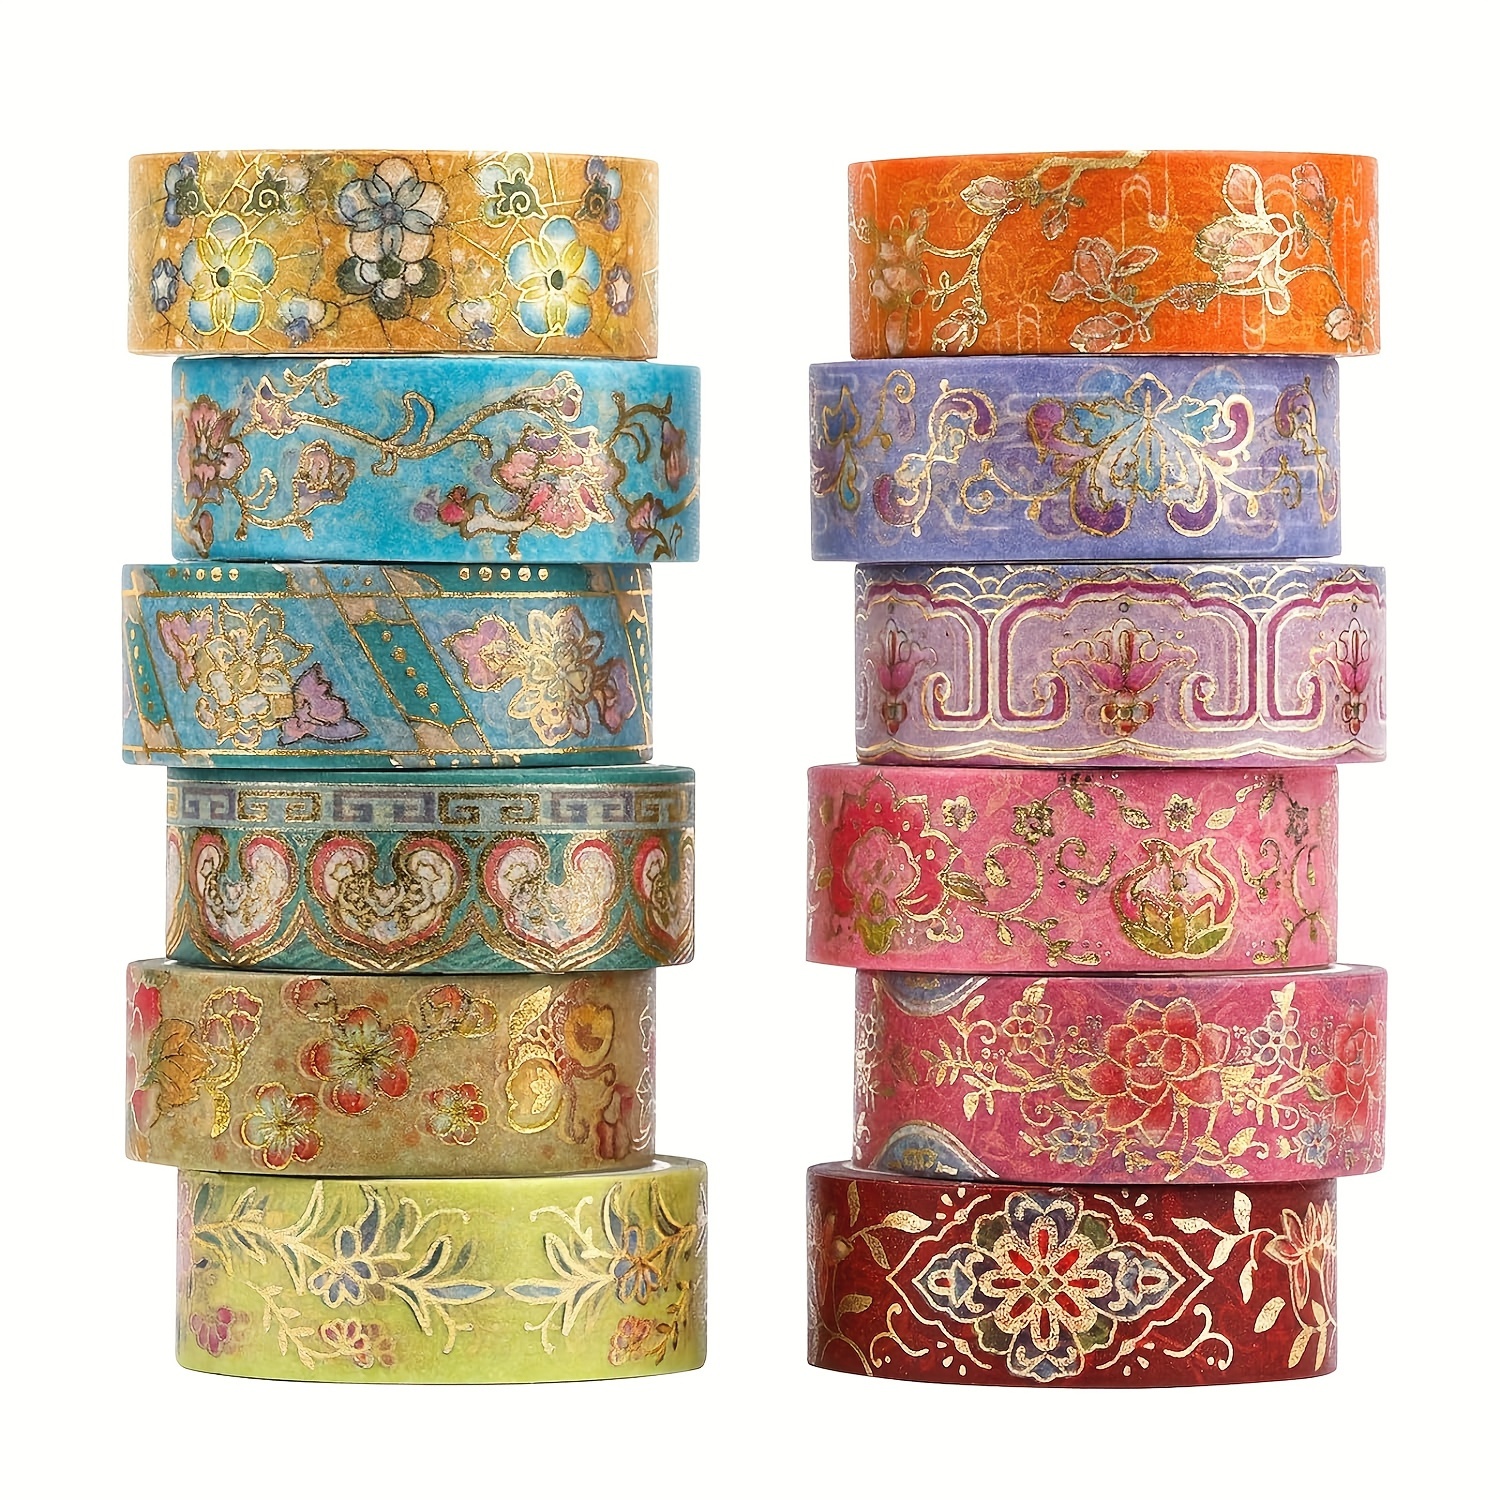 

12pcs Washi Tape Set, 12 Rolls Vintage Masking Tape, Golden Foil Decorative Tape, 5m/16.4ft Long Glitting Oriental Aesthetic Journaling Supplies For Planner, Bujo, Artistic Projects - 15mm